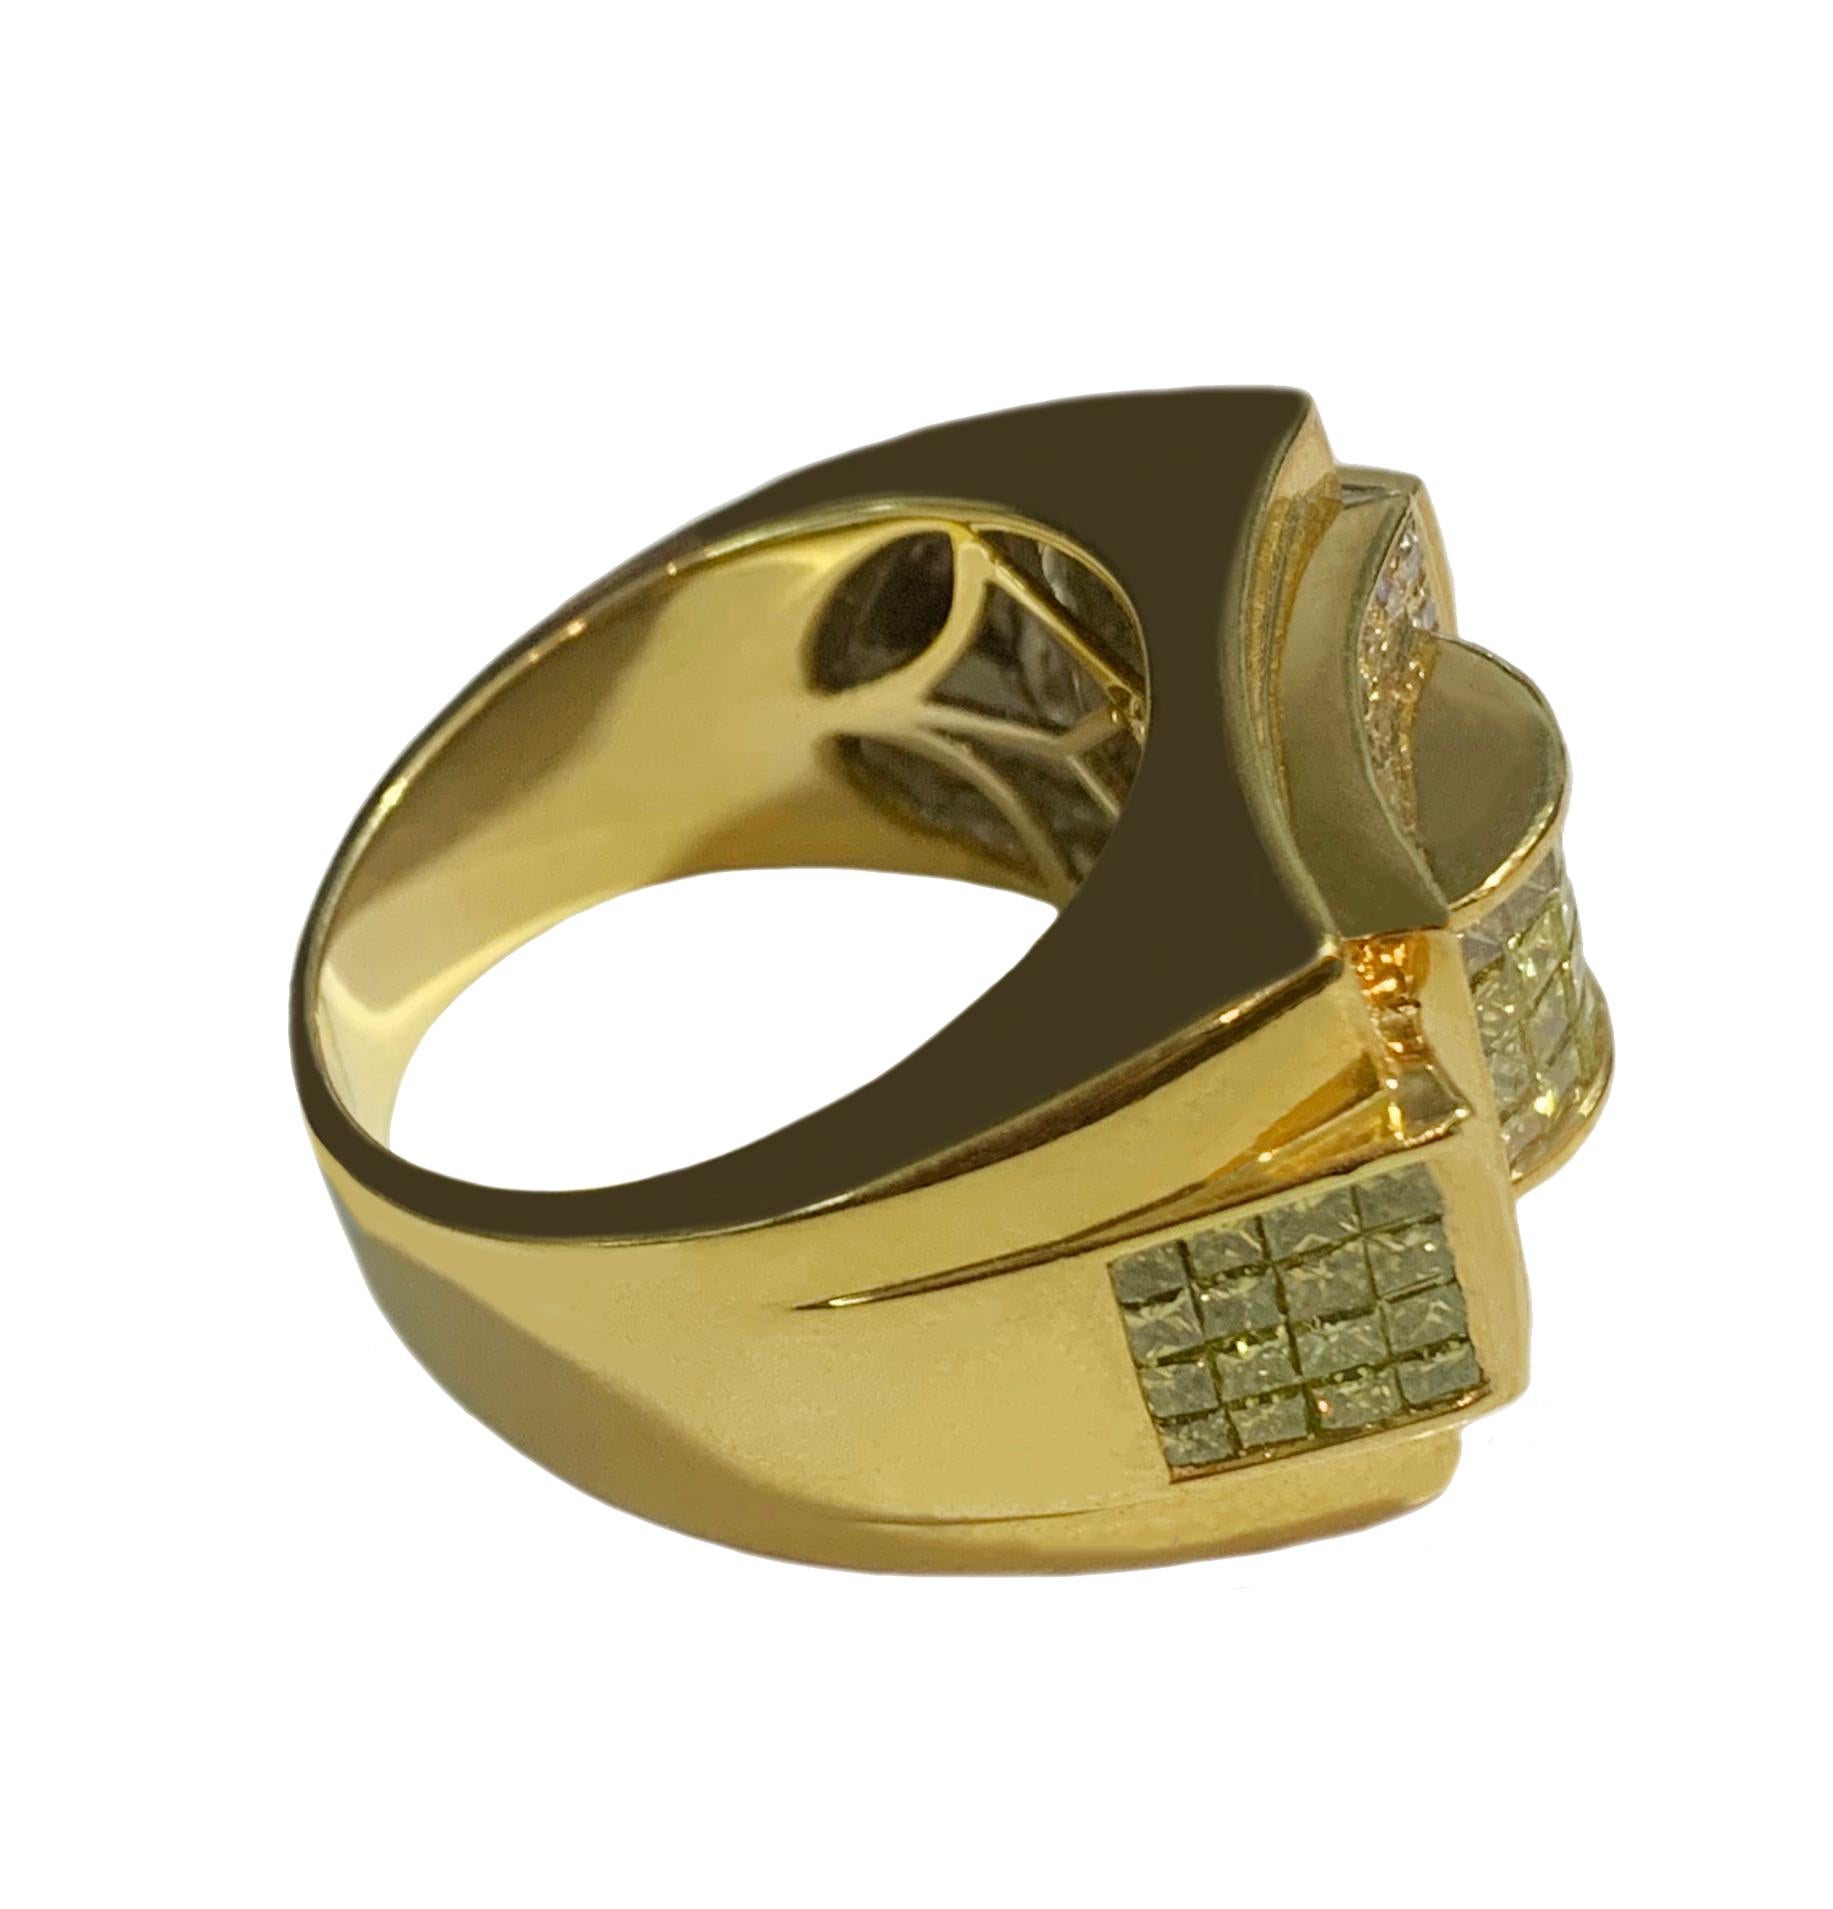 -Custom made

-14k Yellow gold

-Ring size: 10.5

-Weight: 20gr

-Ornament dimensioin: 0.55x0.9’’

-Diamond: 2.9ct, SI clarity, G color